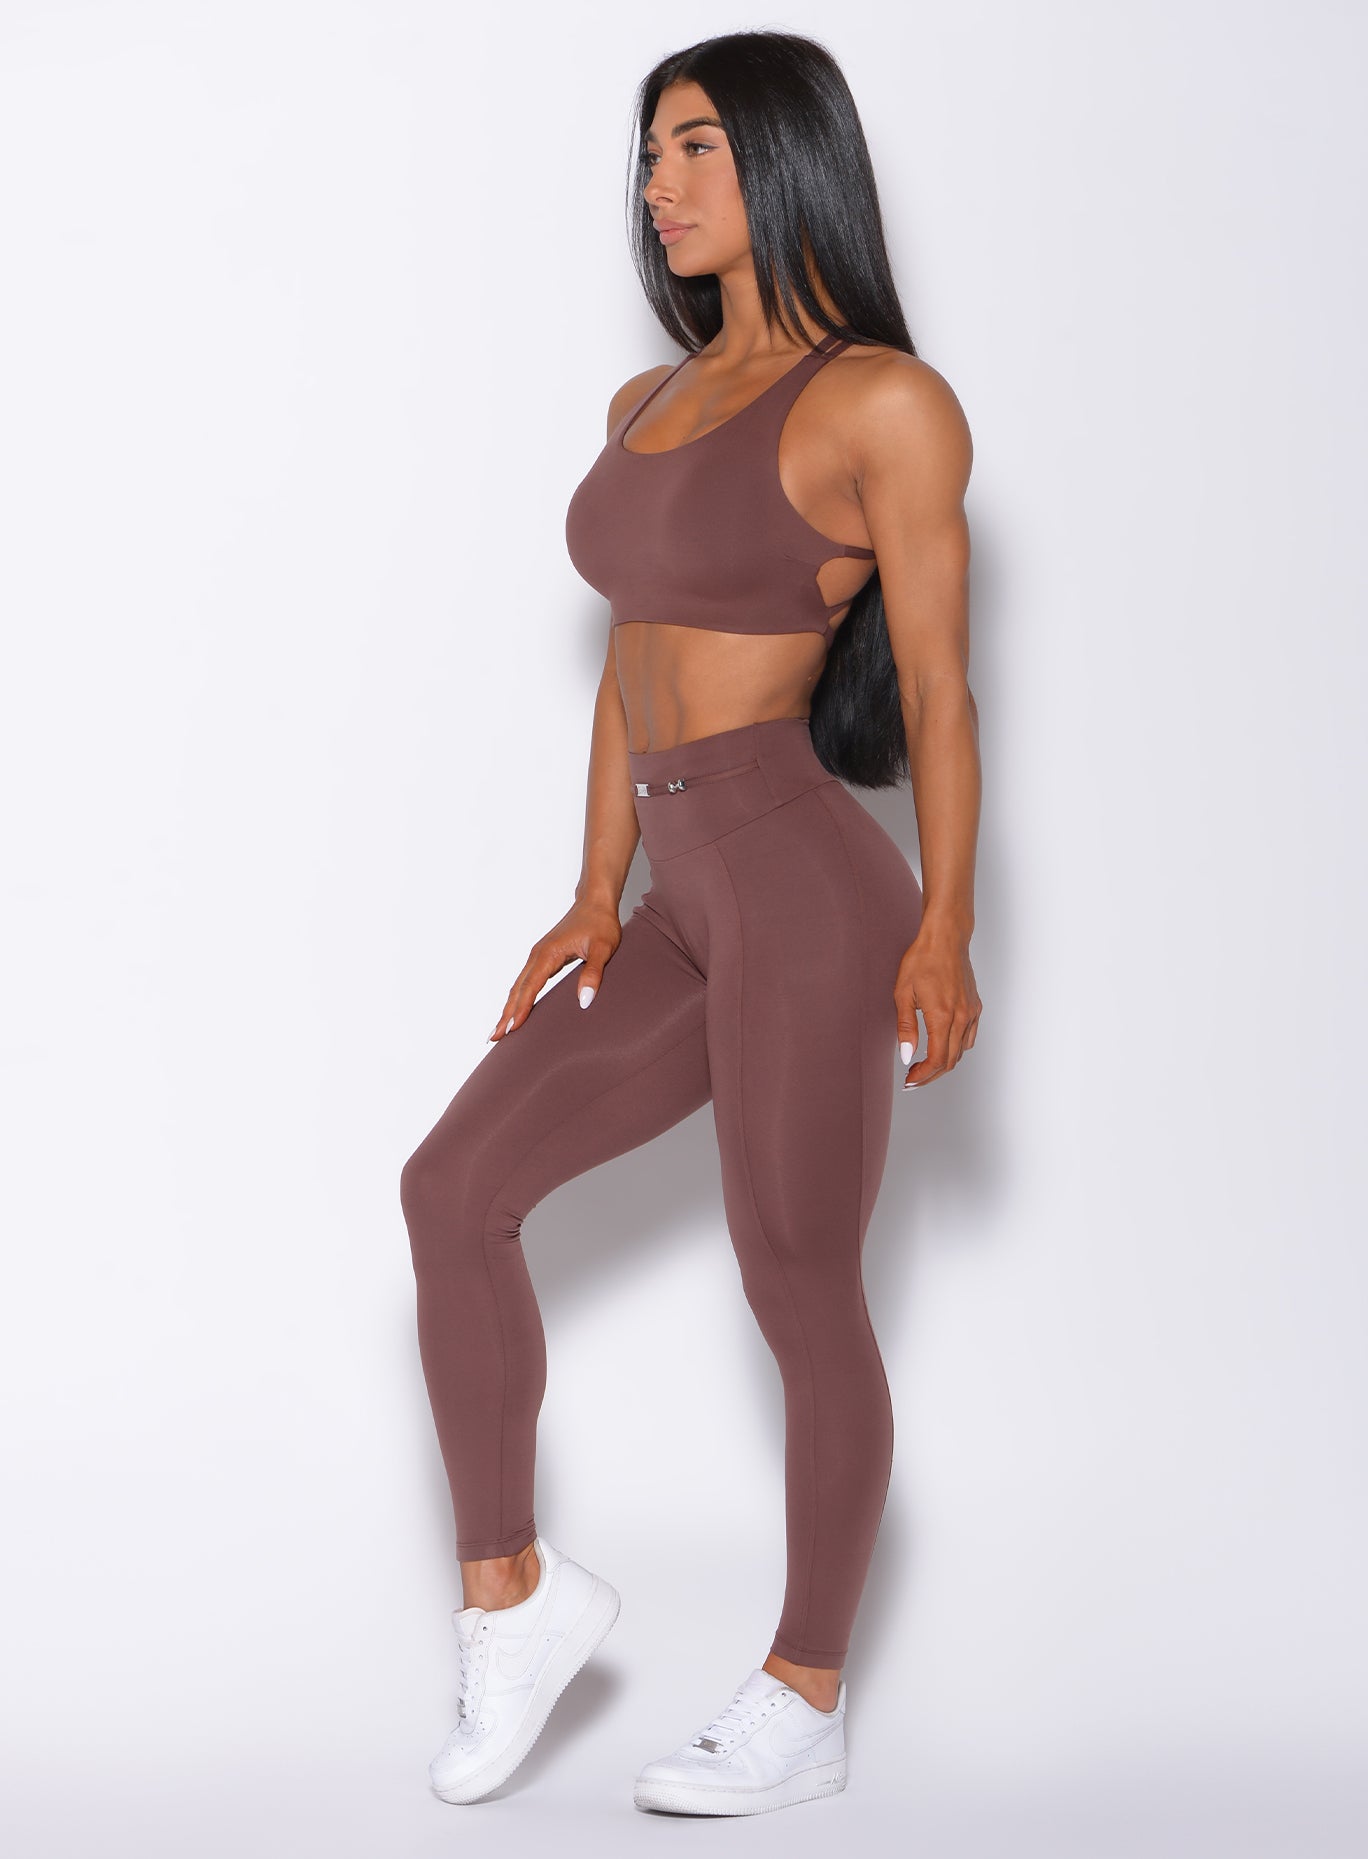 Left side profile view of a model angled left wearing our barbell leggings in chocolate color and a matching bra